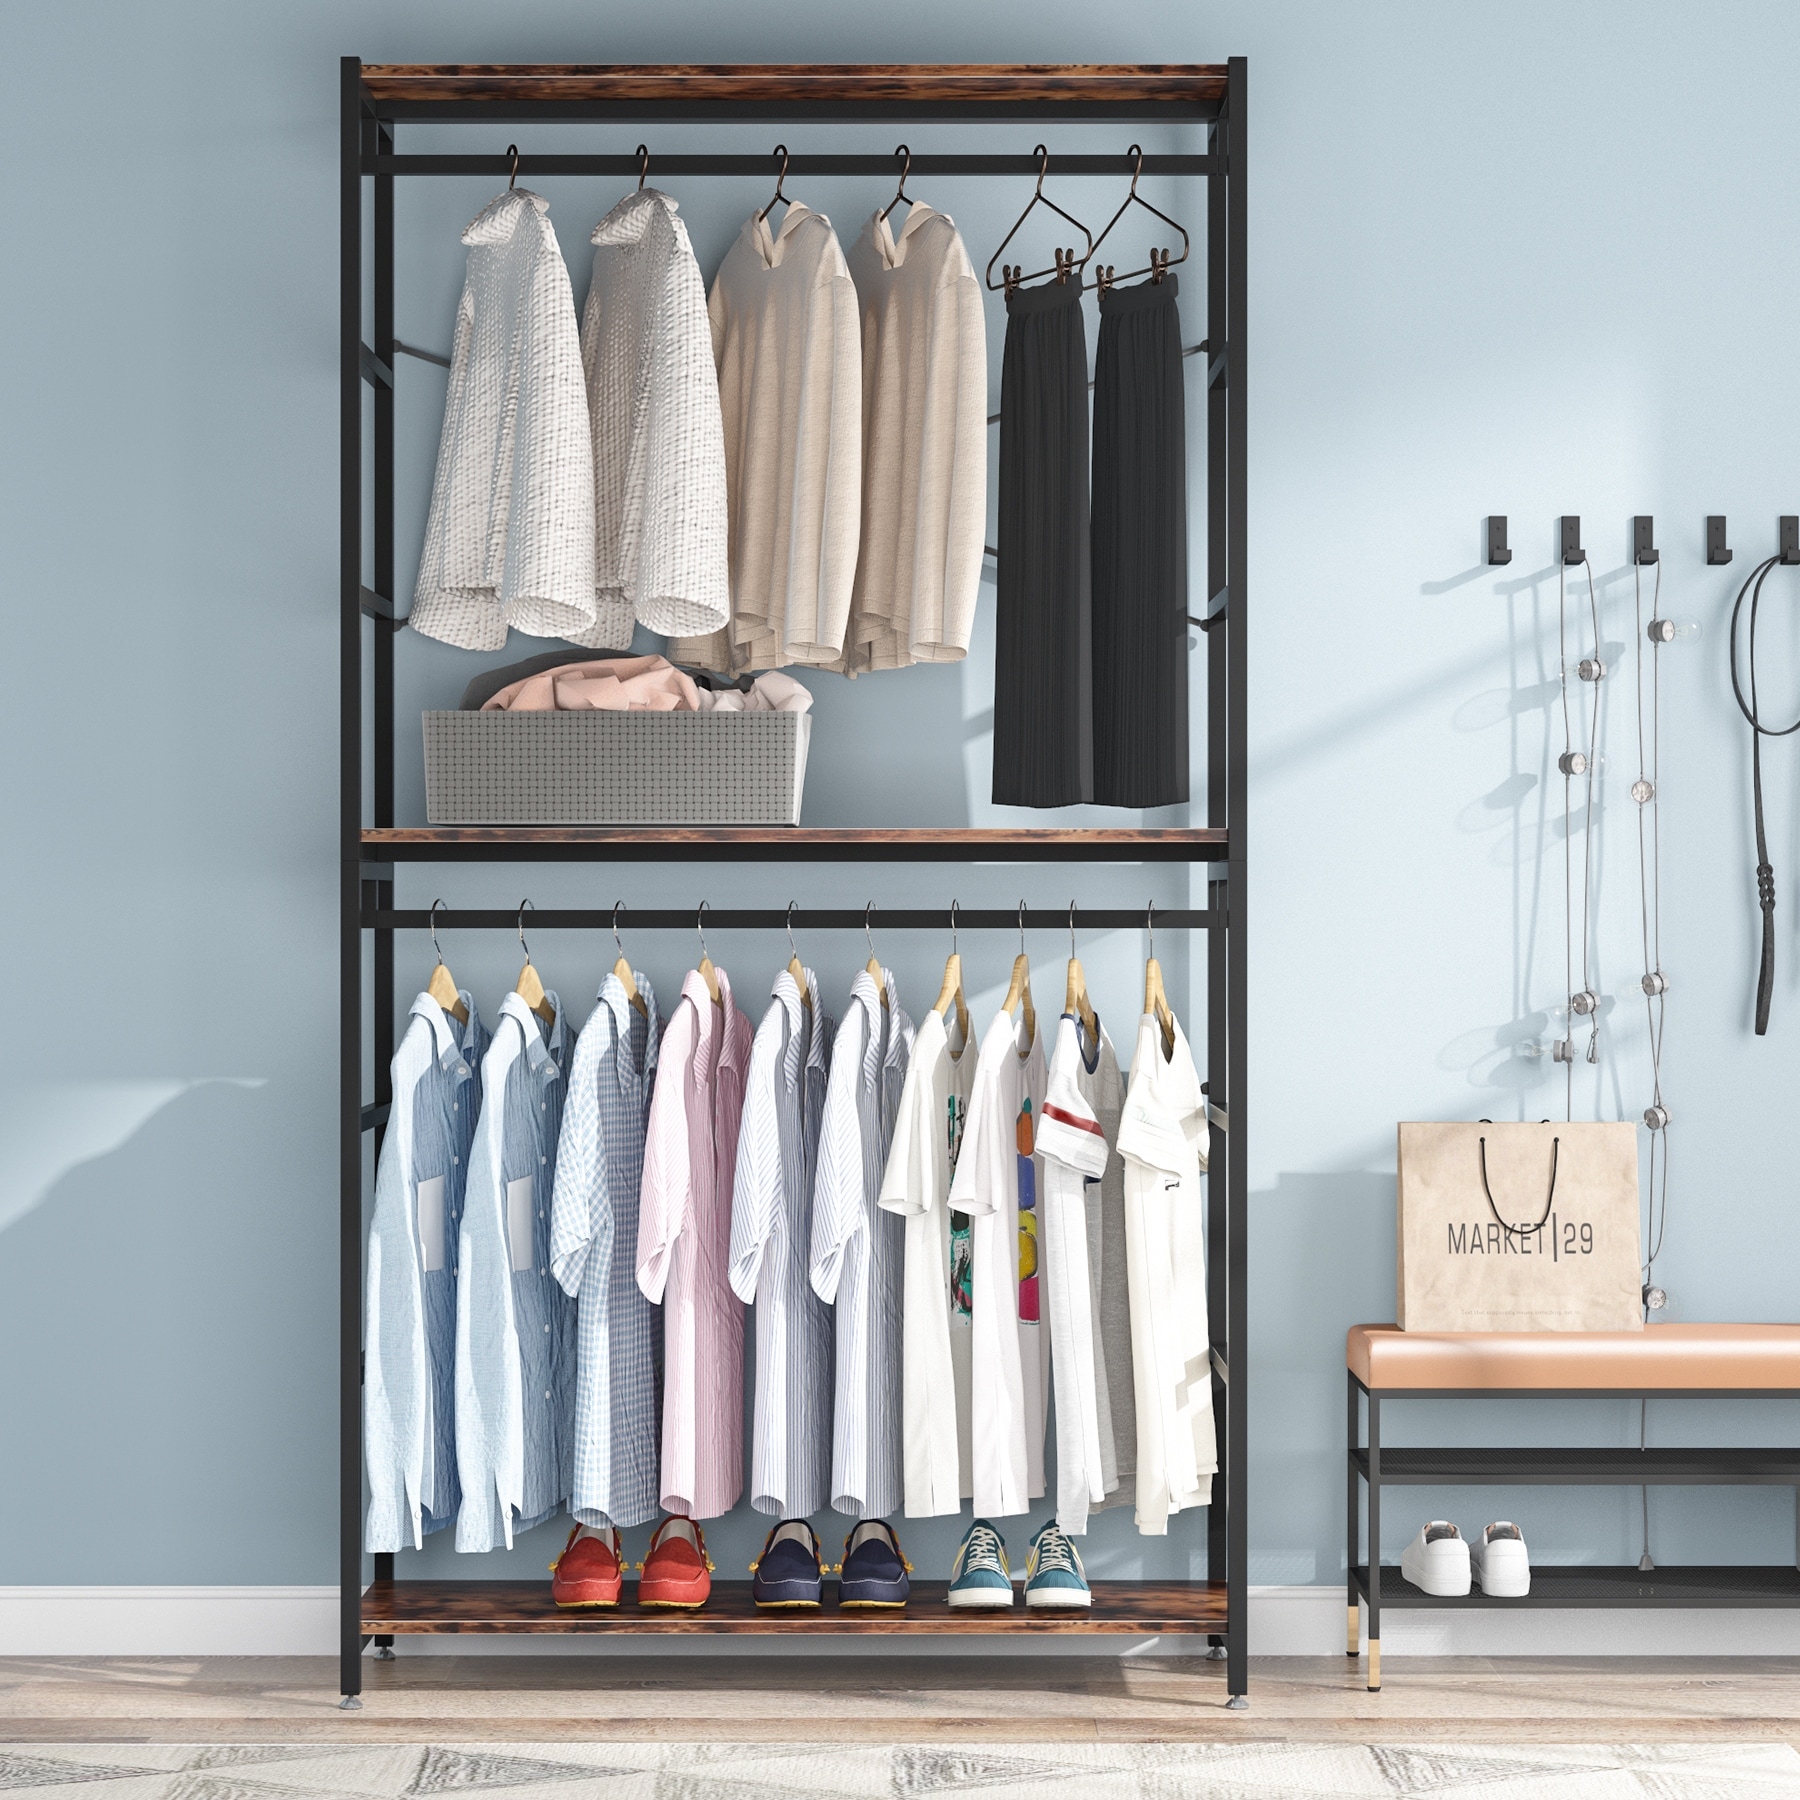 https://ak1.ostkcdn.com/images/products/is/images/direct/2de7f3c9f564705c4b1bd5853f9357d060017391/Extra-tall-47-inches-Double-Rod-Closet-Shelf-Freestanding-3-Shelves-Clothes-Clothing-Garment-Racks.jpg